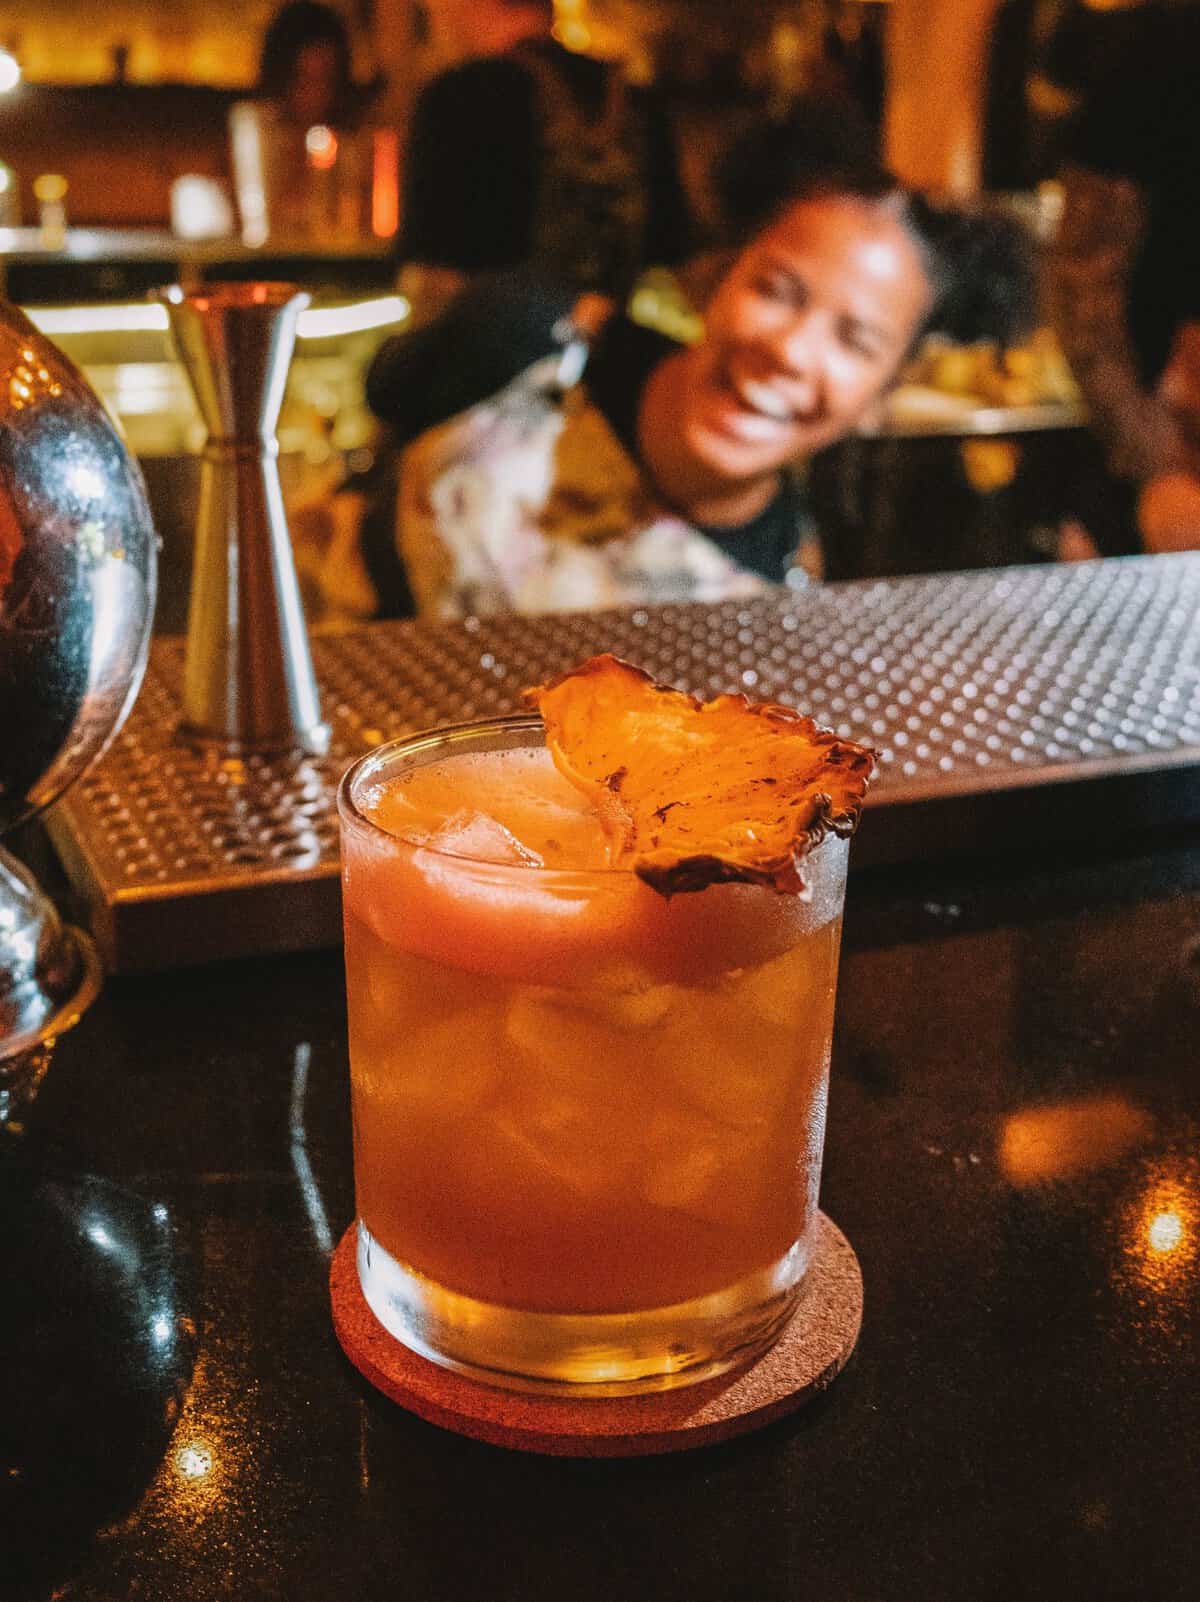 A custom cocktail from Alquimico—with the silly bartender posing in the background!